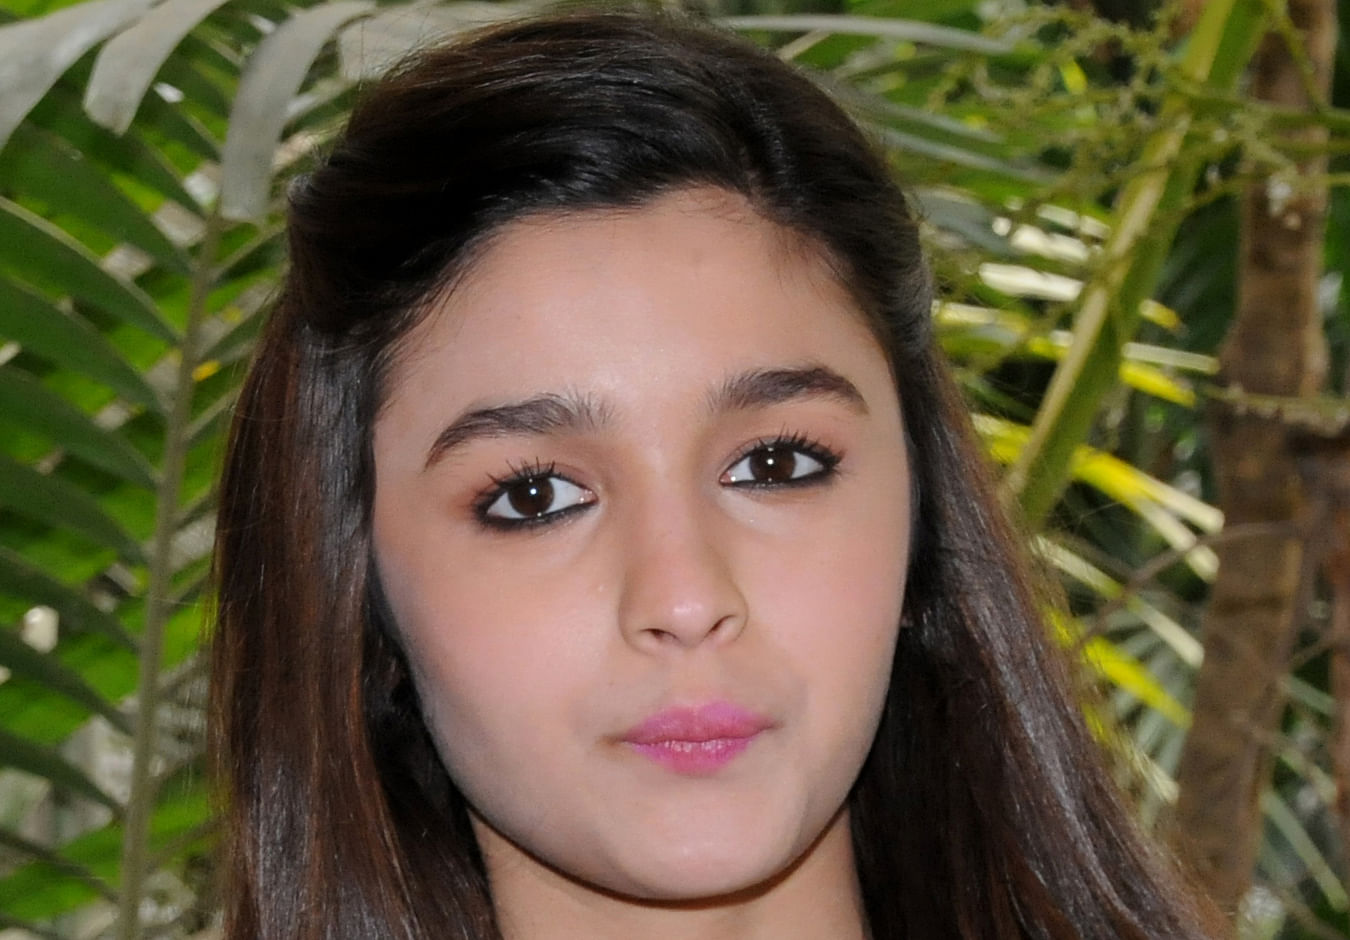 "Highway" actress Alia Bhatt turned to her Twitter page Saturday to set the record straight that all Facebook pages in her name are "fake". DH photo